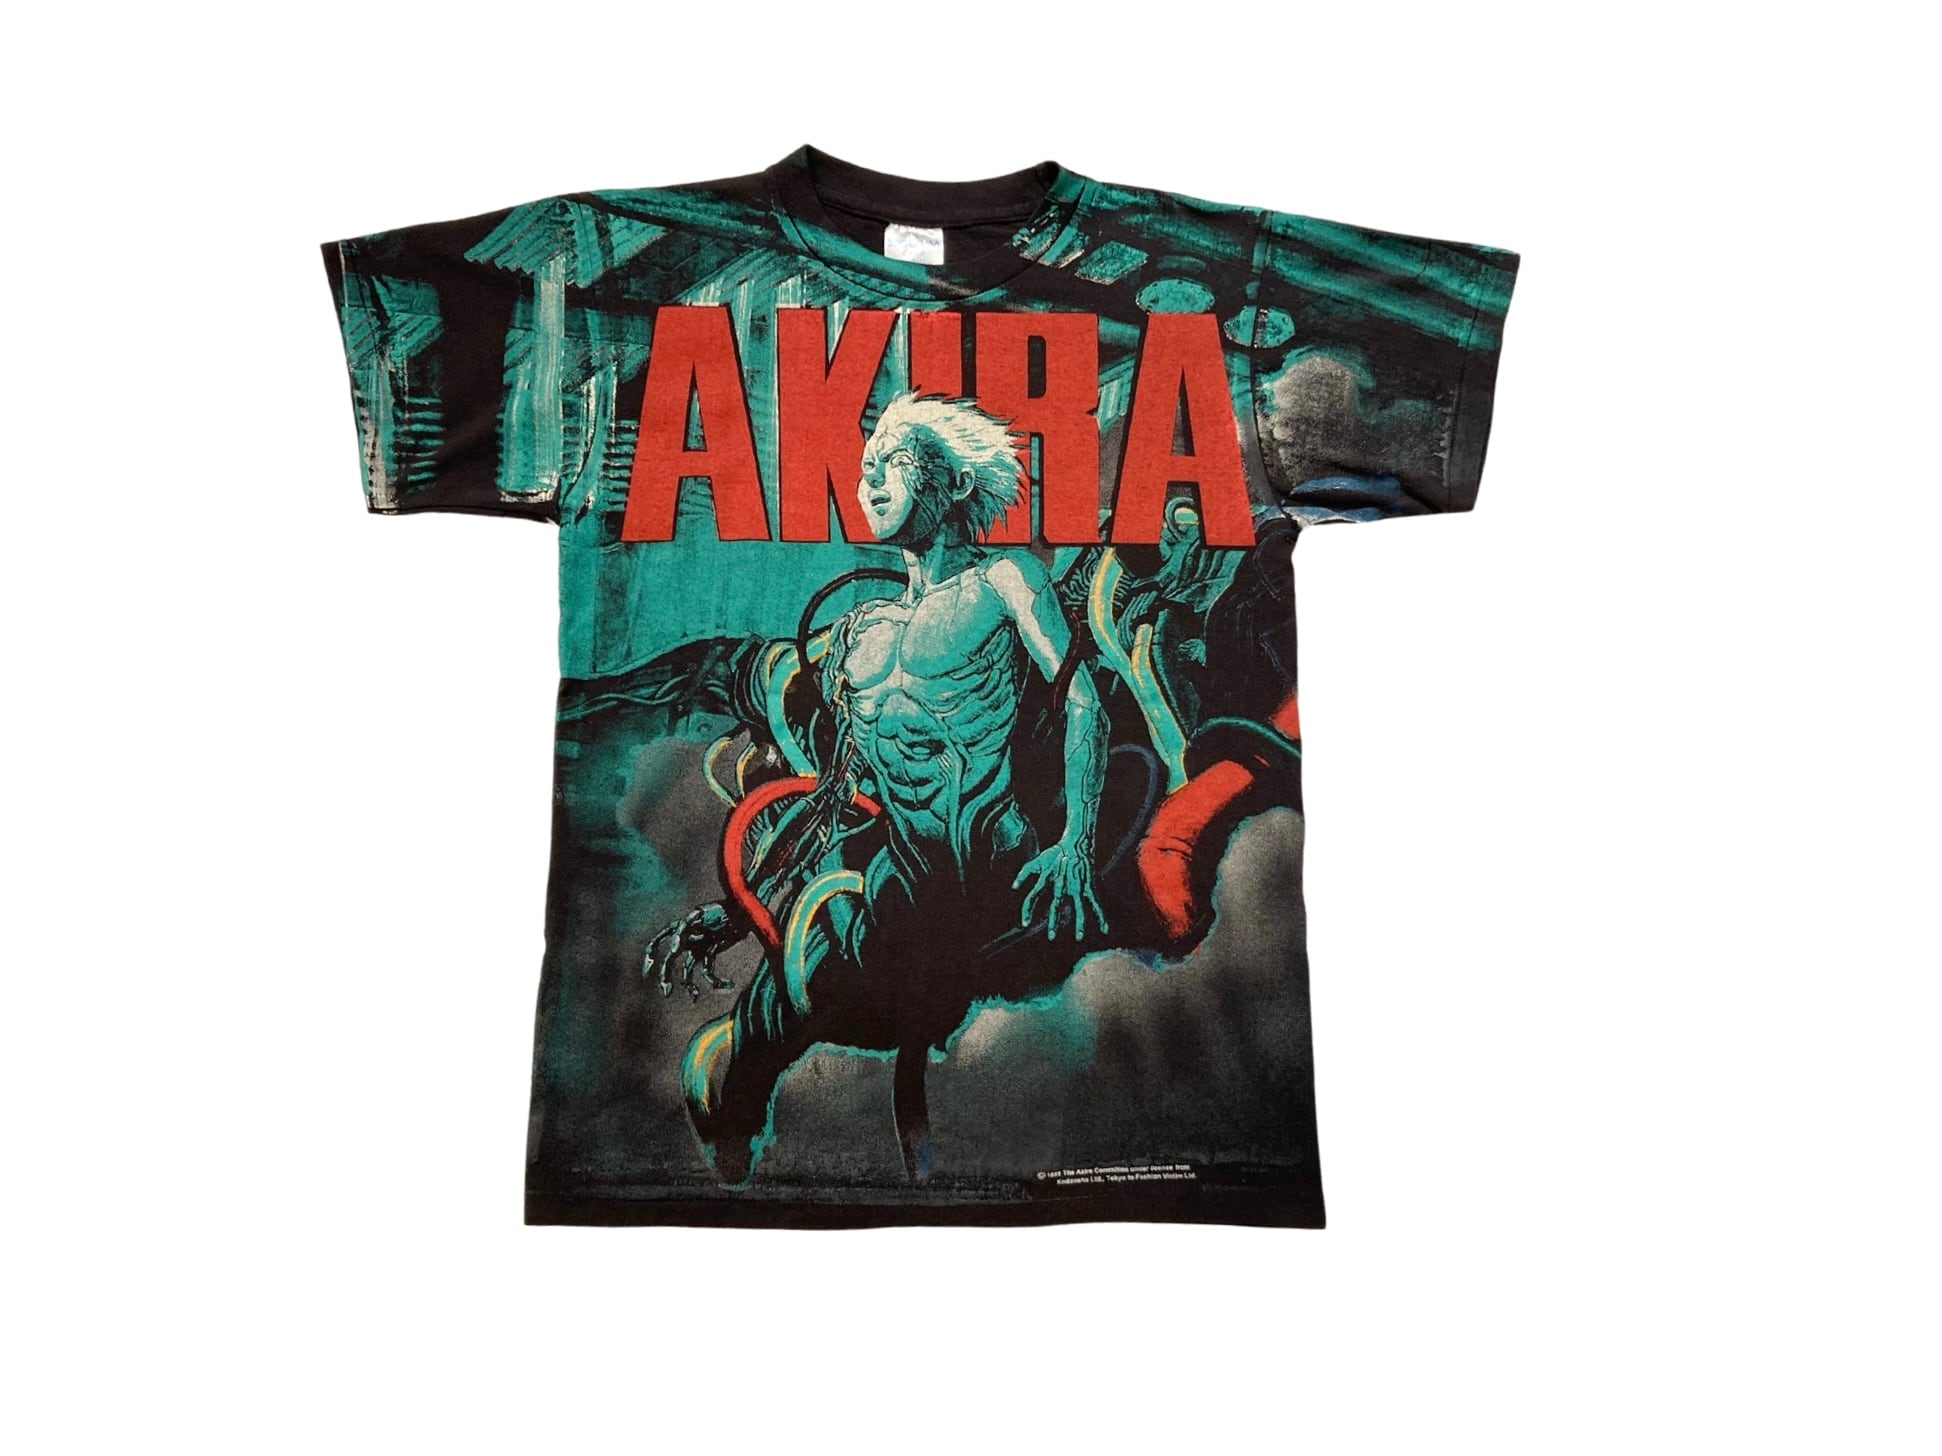 88s vintage AKIRA T-SHIRT made in USA | BLACK BOX STORE powered by BASE